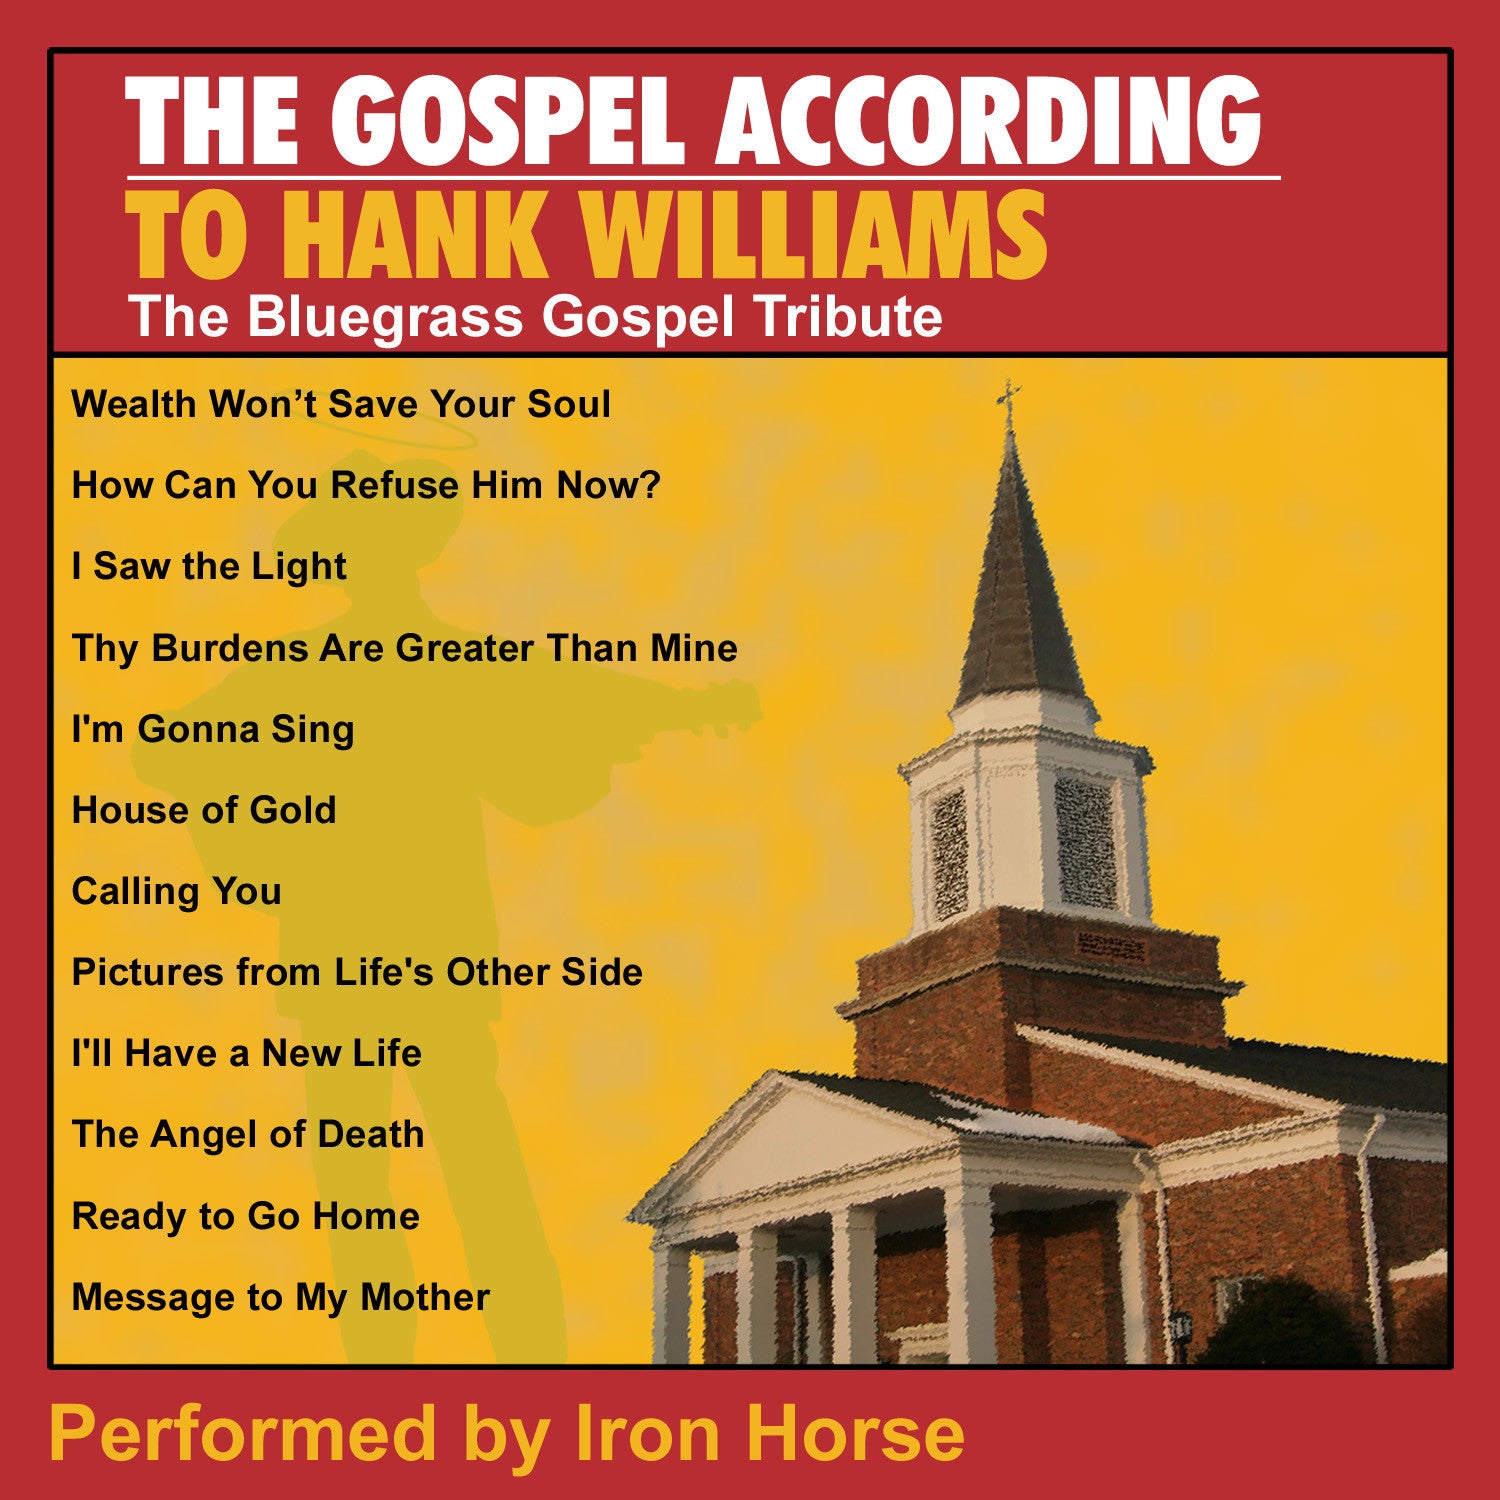 The Gospel According to Hank Williams: The Bluegrass Gospel Tribute Performed by Iron Horse